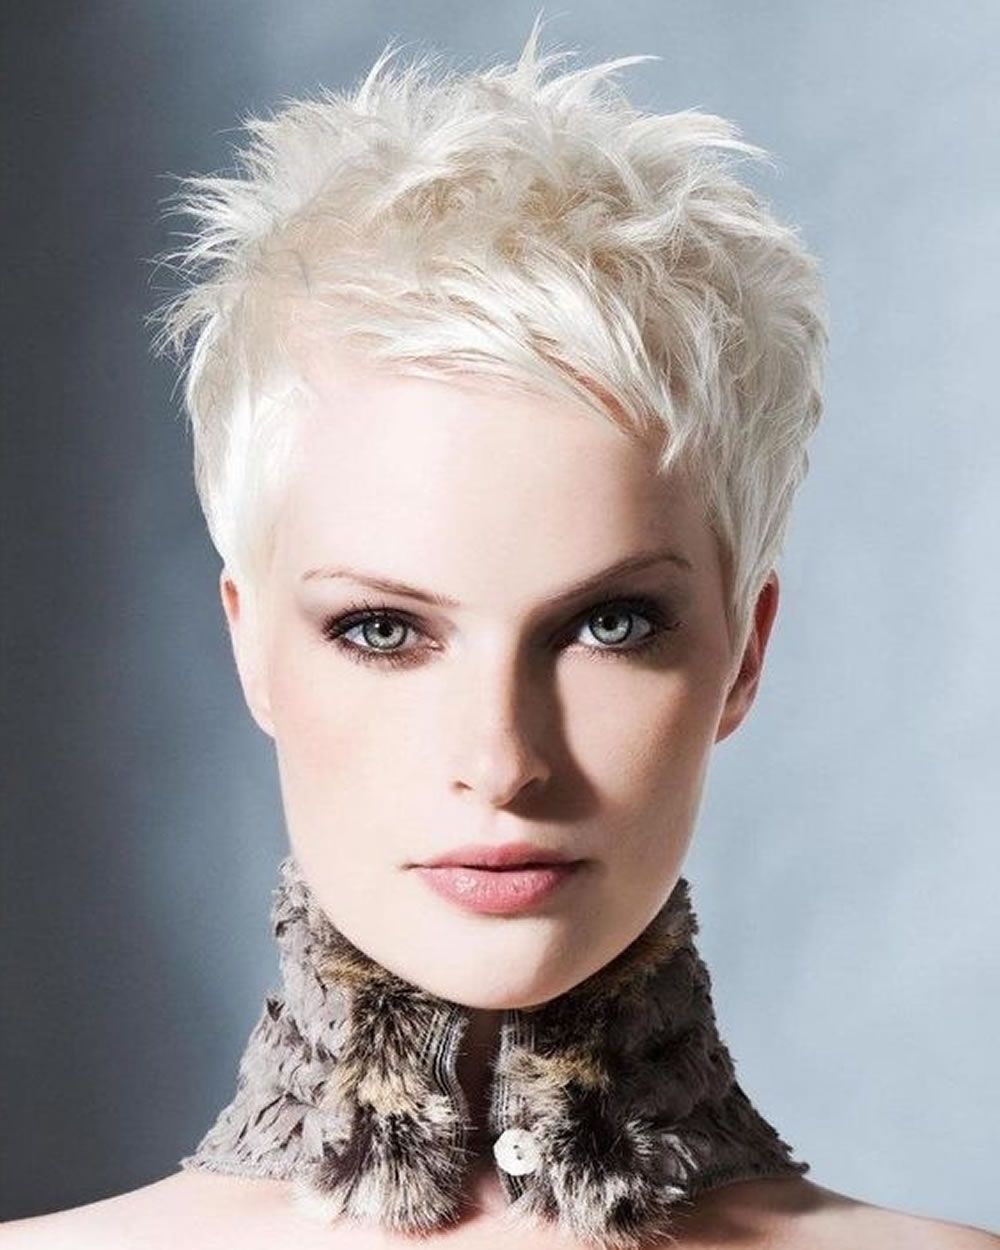 Super Very Short Pixie Haircuts & Hair Colors For 2018 2019 | Page With Latest Short Pixie Hairstyles For Women (Photo 8 of 15)